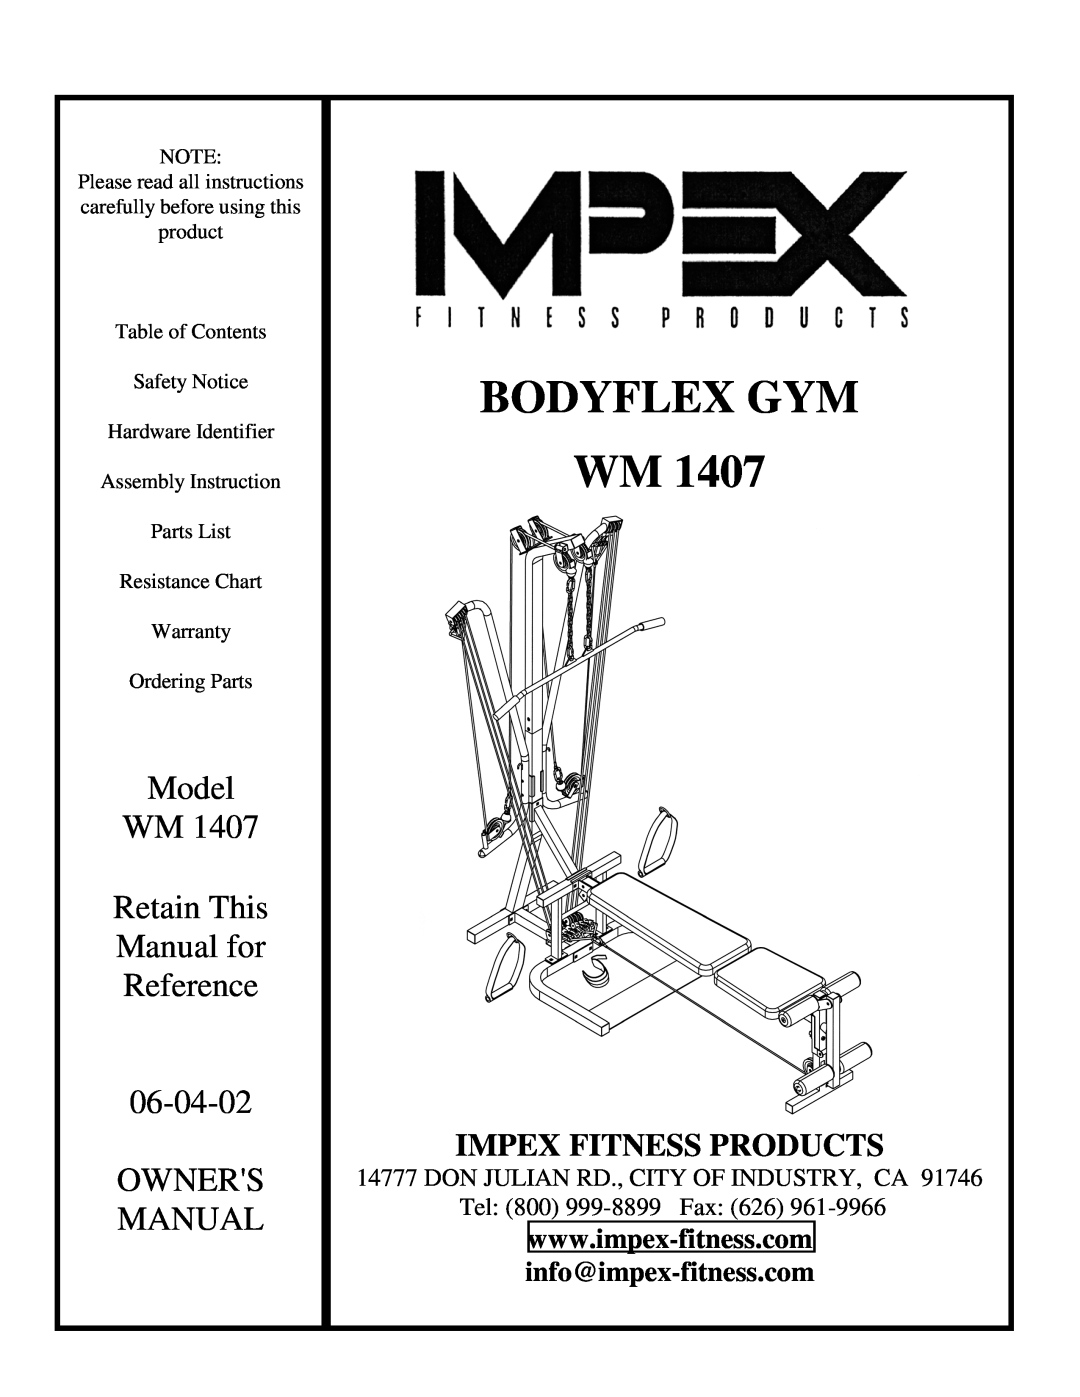 Impex WM 1407 manual info@impex-fitness.com, Bodyflex Gym, Model, Retain This, Manual for, Reference, Owners, 06-04-02 